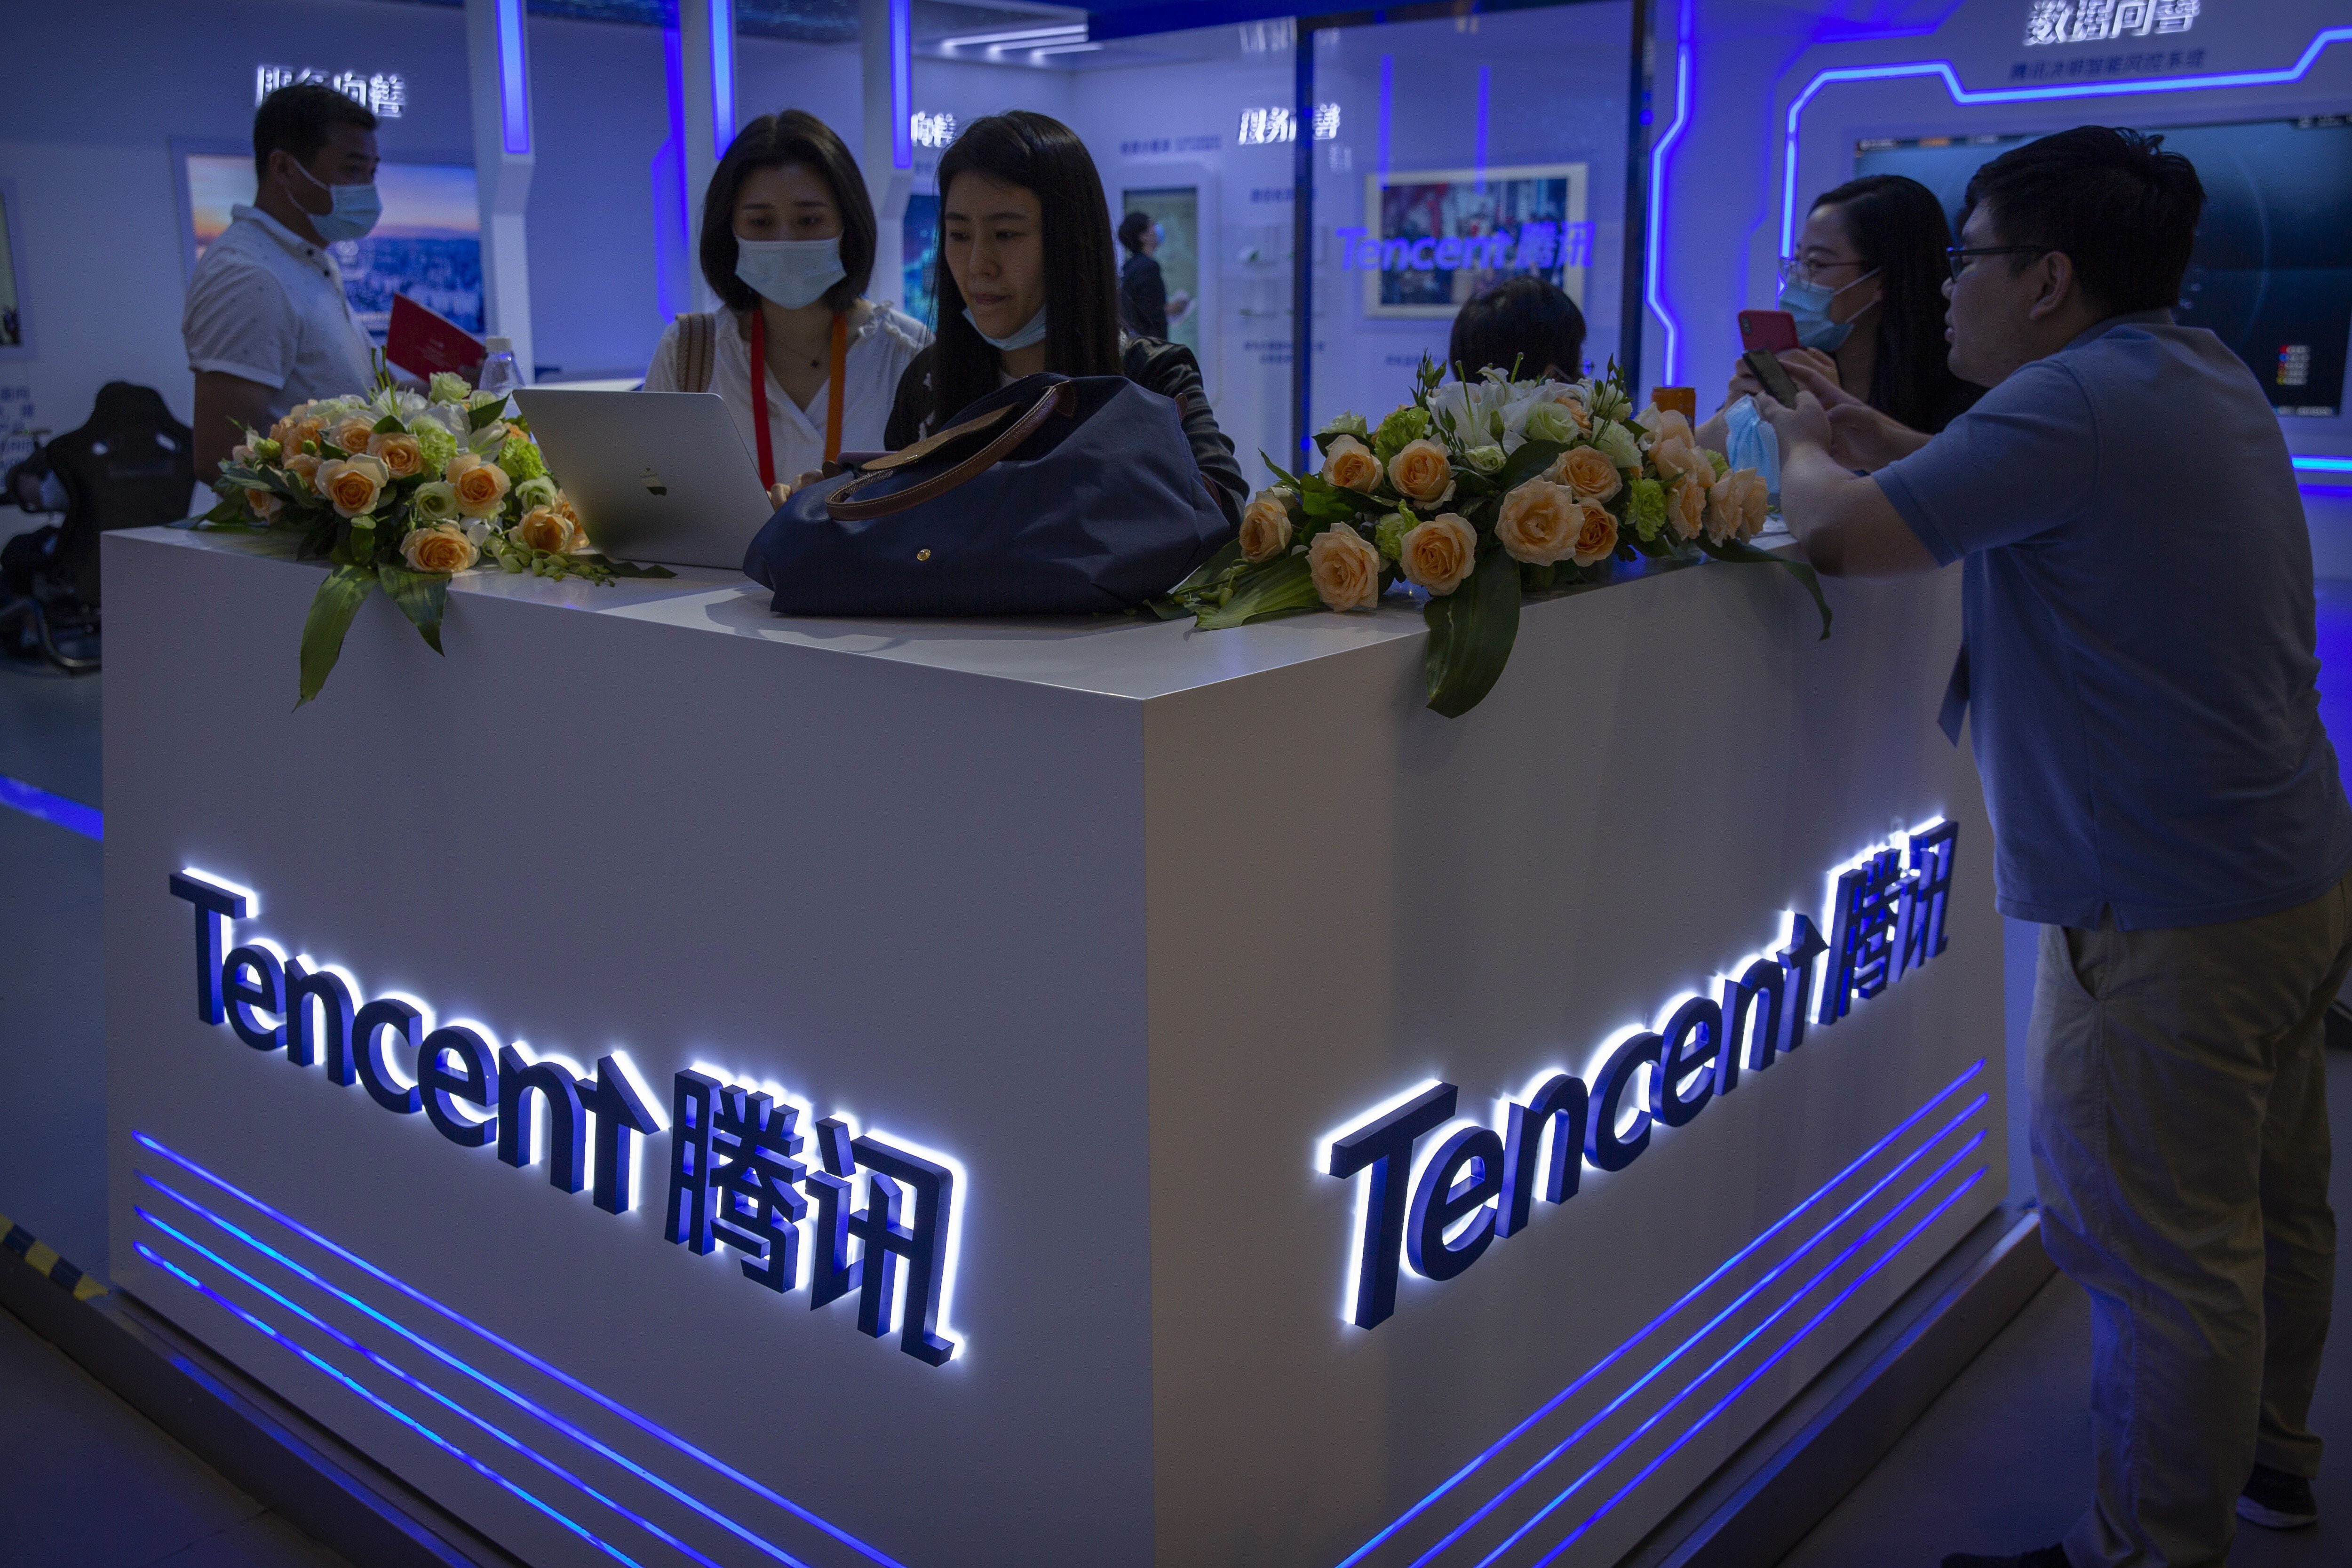 Visitors gather at a display booth for Chinese technology firm Tencent at the China International Fair for Trade in Services (CIFTIS) in Beijing in 2020. Photo: AP